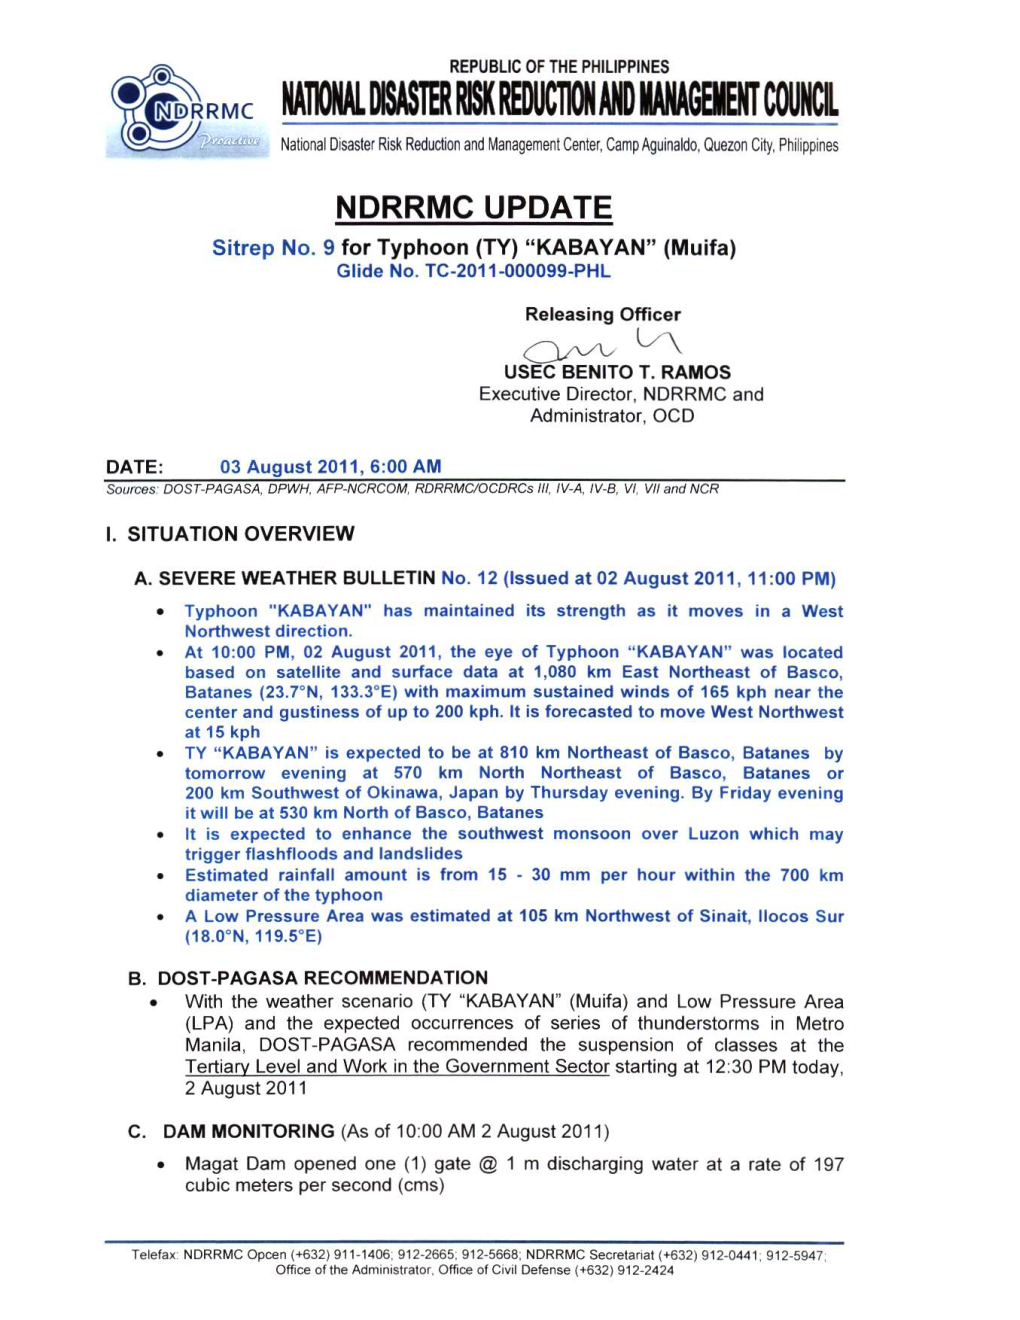 NDRRMC Update for Sitrep No 9 for TY KABAYAN 3 Aug 2011